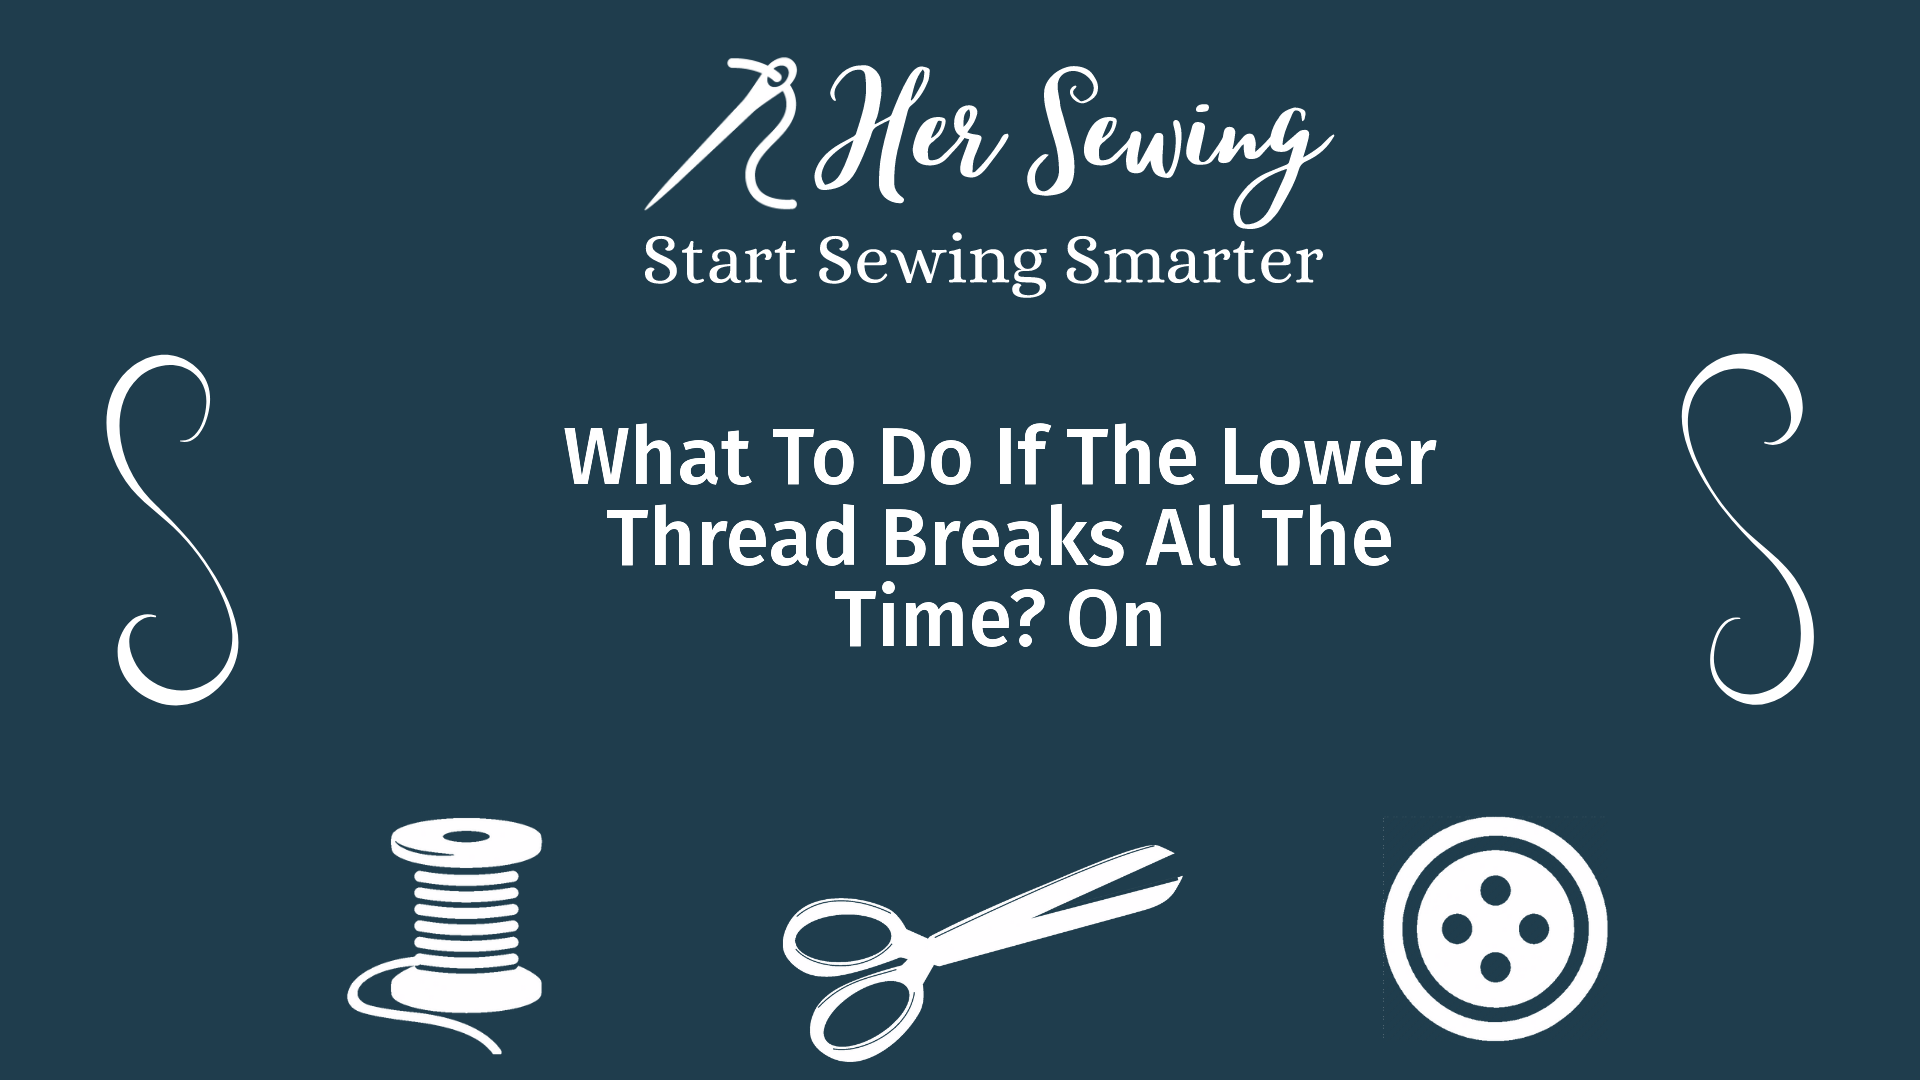 What To Do If The Lower Thread Breaks All The Time? On